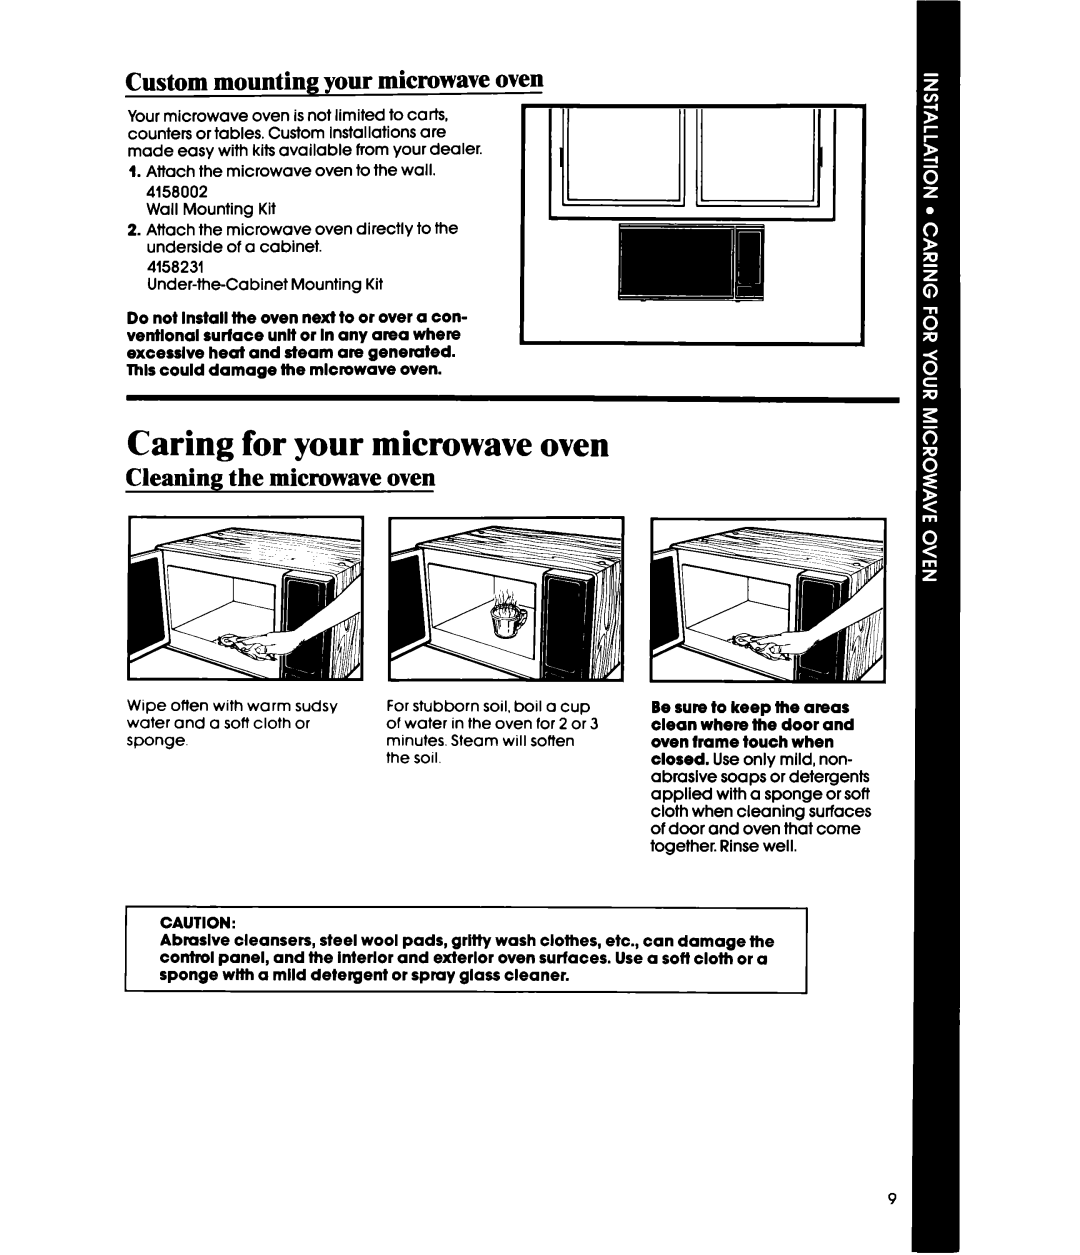 Whirlpool MWIOOOXS manual Caring for your microwave oven, Custom mounting your microwave oven, Cleaning the microwave oven 